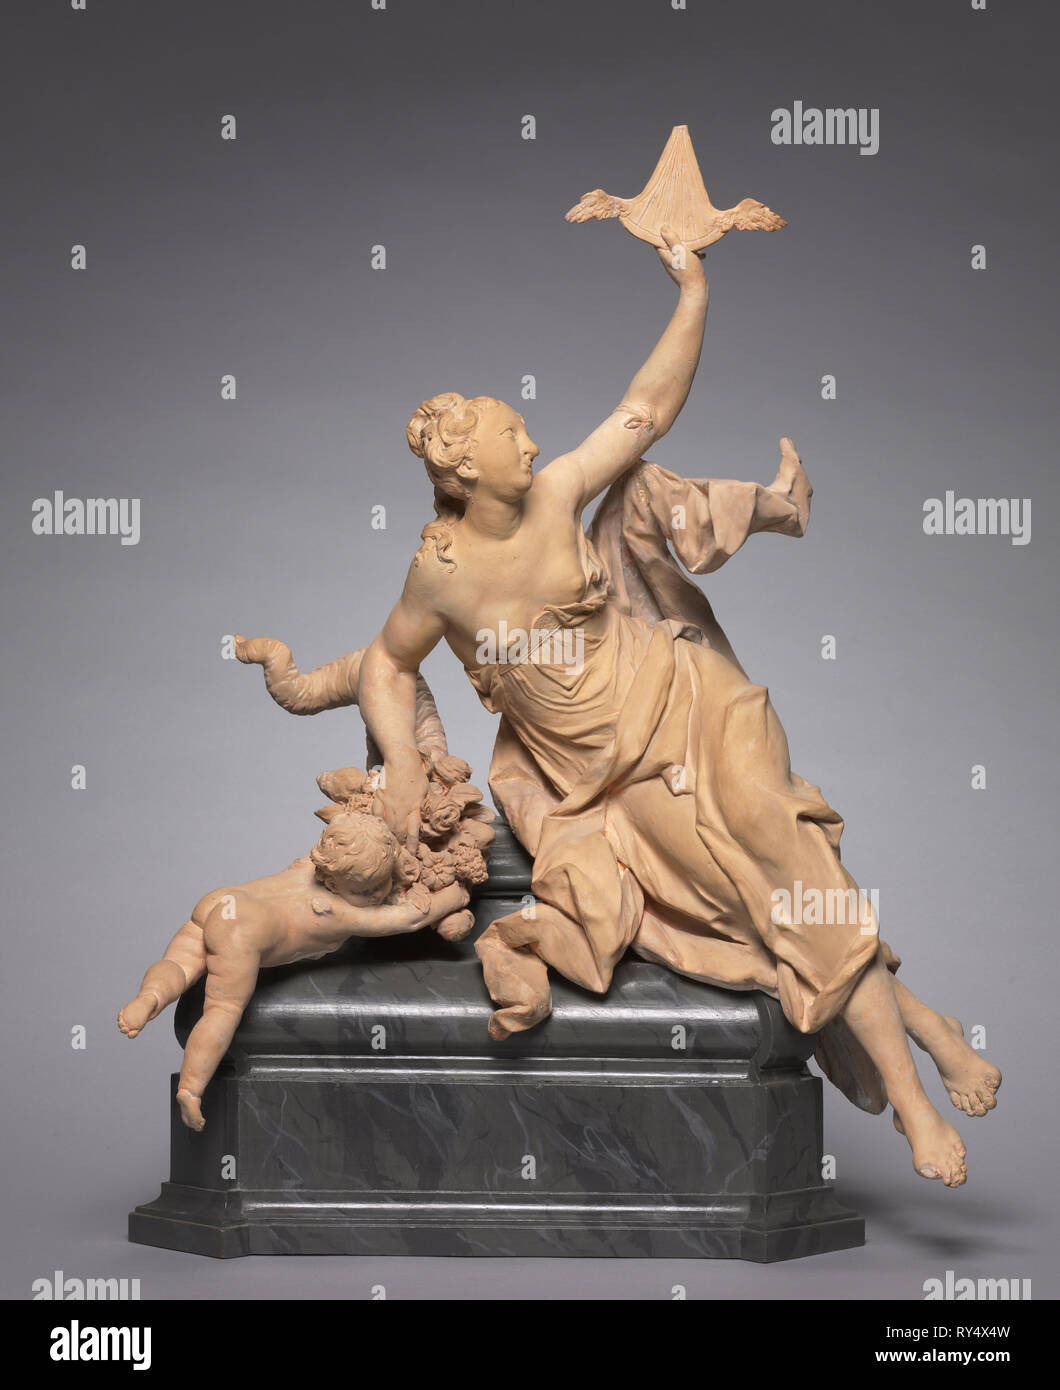 Abundance, c. 1730. Attributed to Lorenzo Matielli (Austrian, c. 1688-1748). Terracotta; overall: 75 x 56.7 x 35.4 cm (29 1/2 x 22 5/16 x 13 15/16 in.); without base: 69.3 cm (27 5/16 in Stock Photo